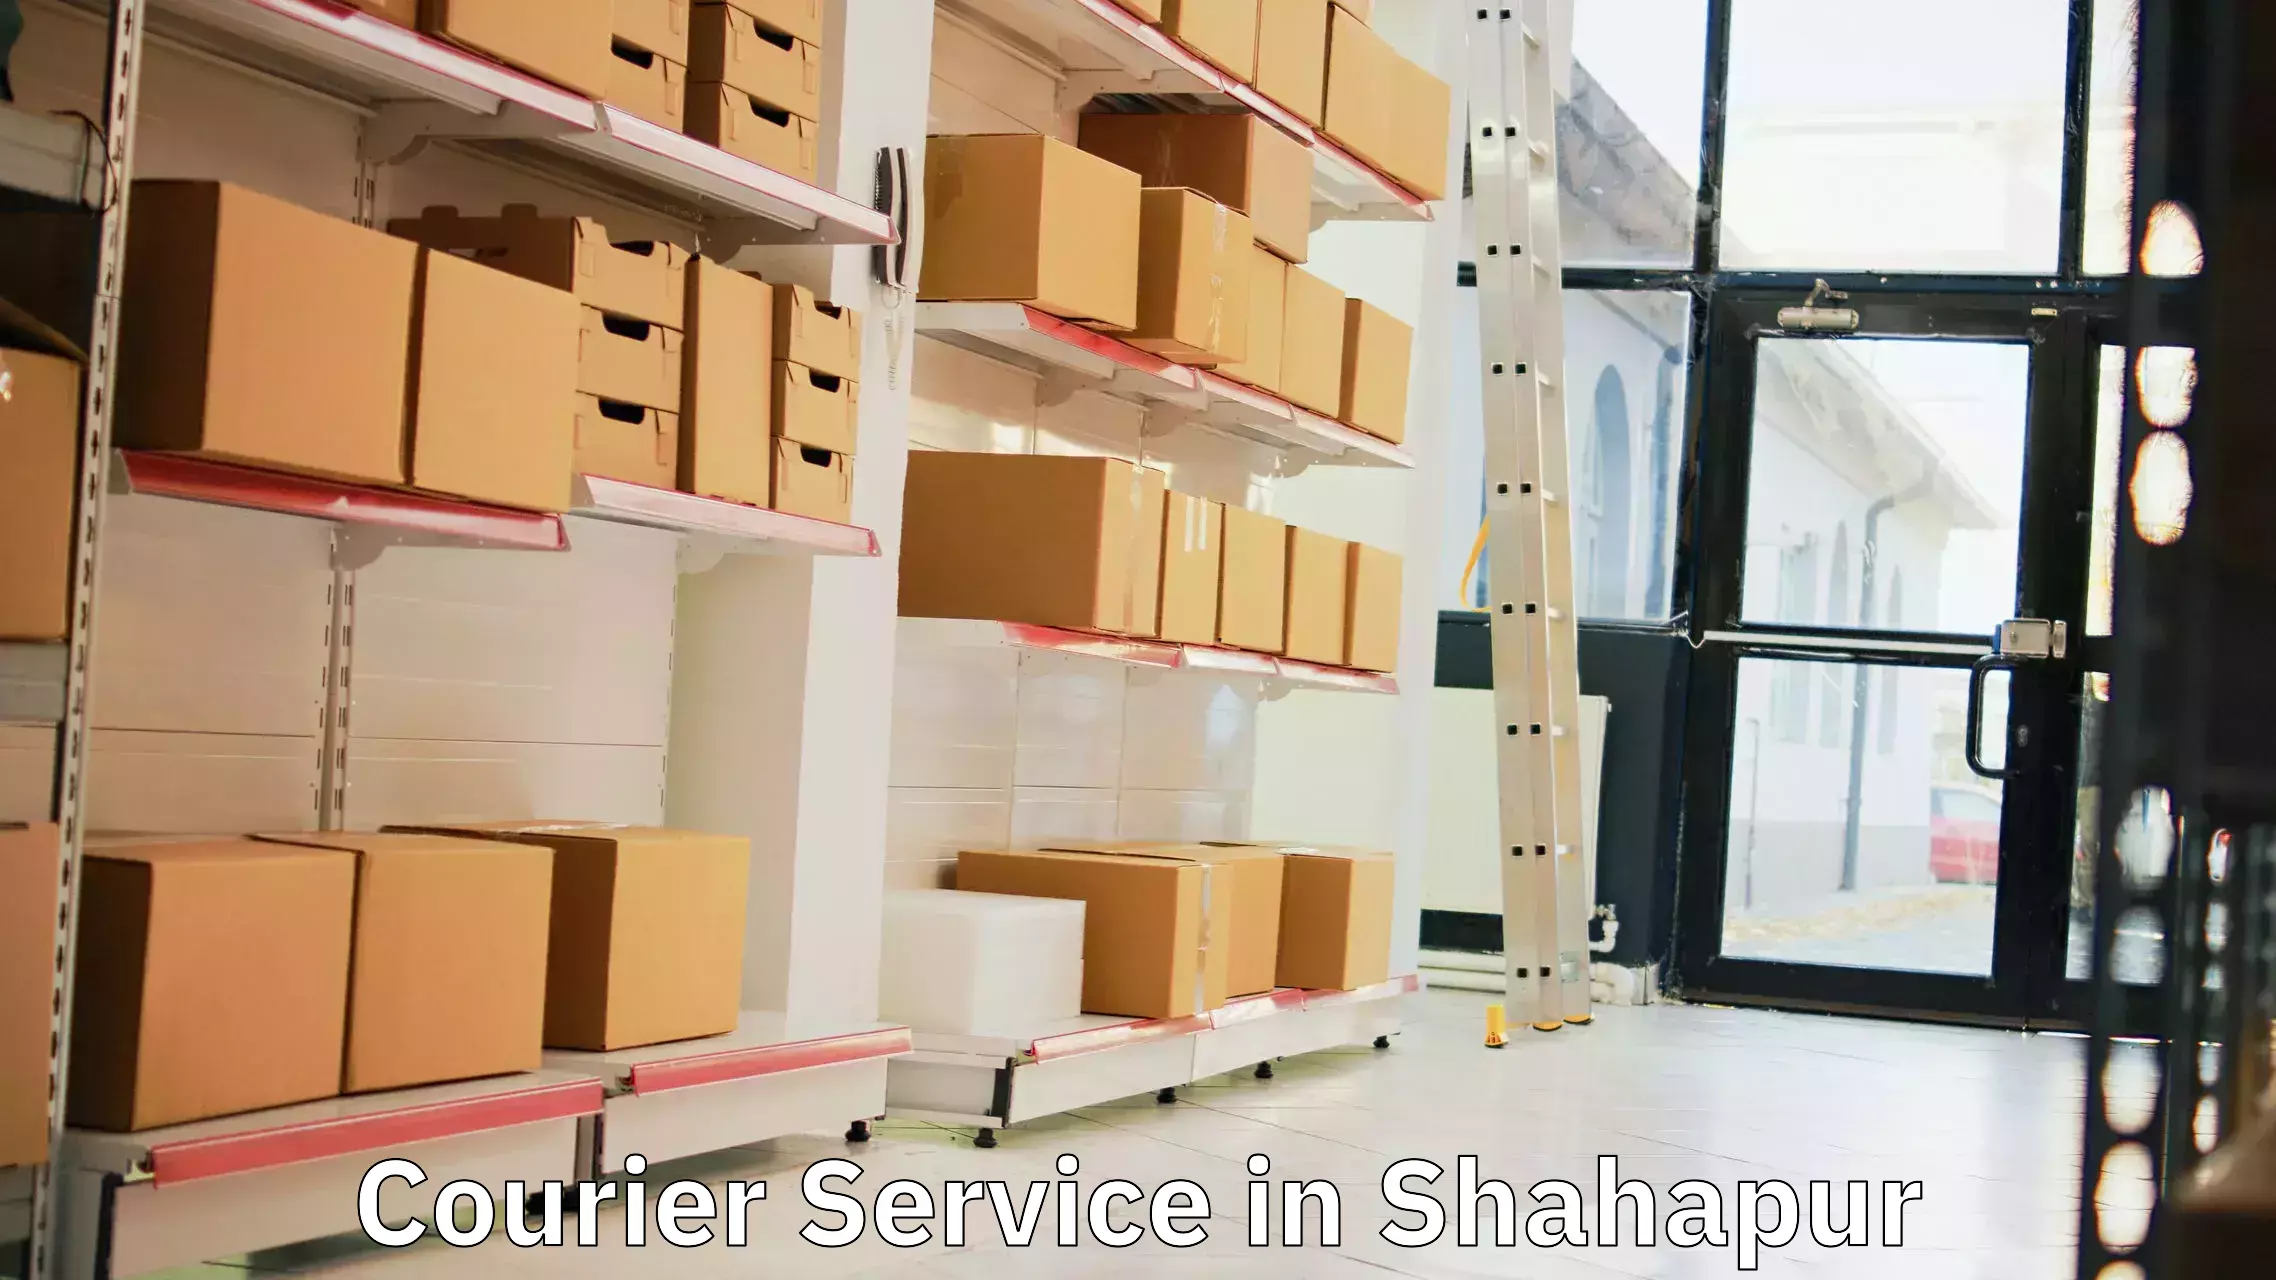 Expedited parcel delivery in Shahapur